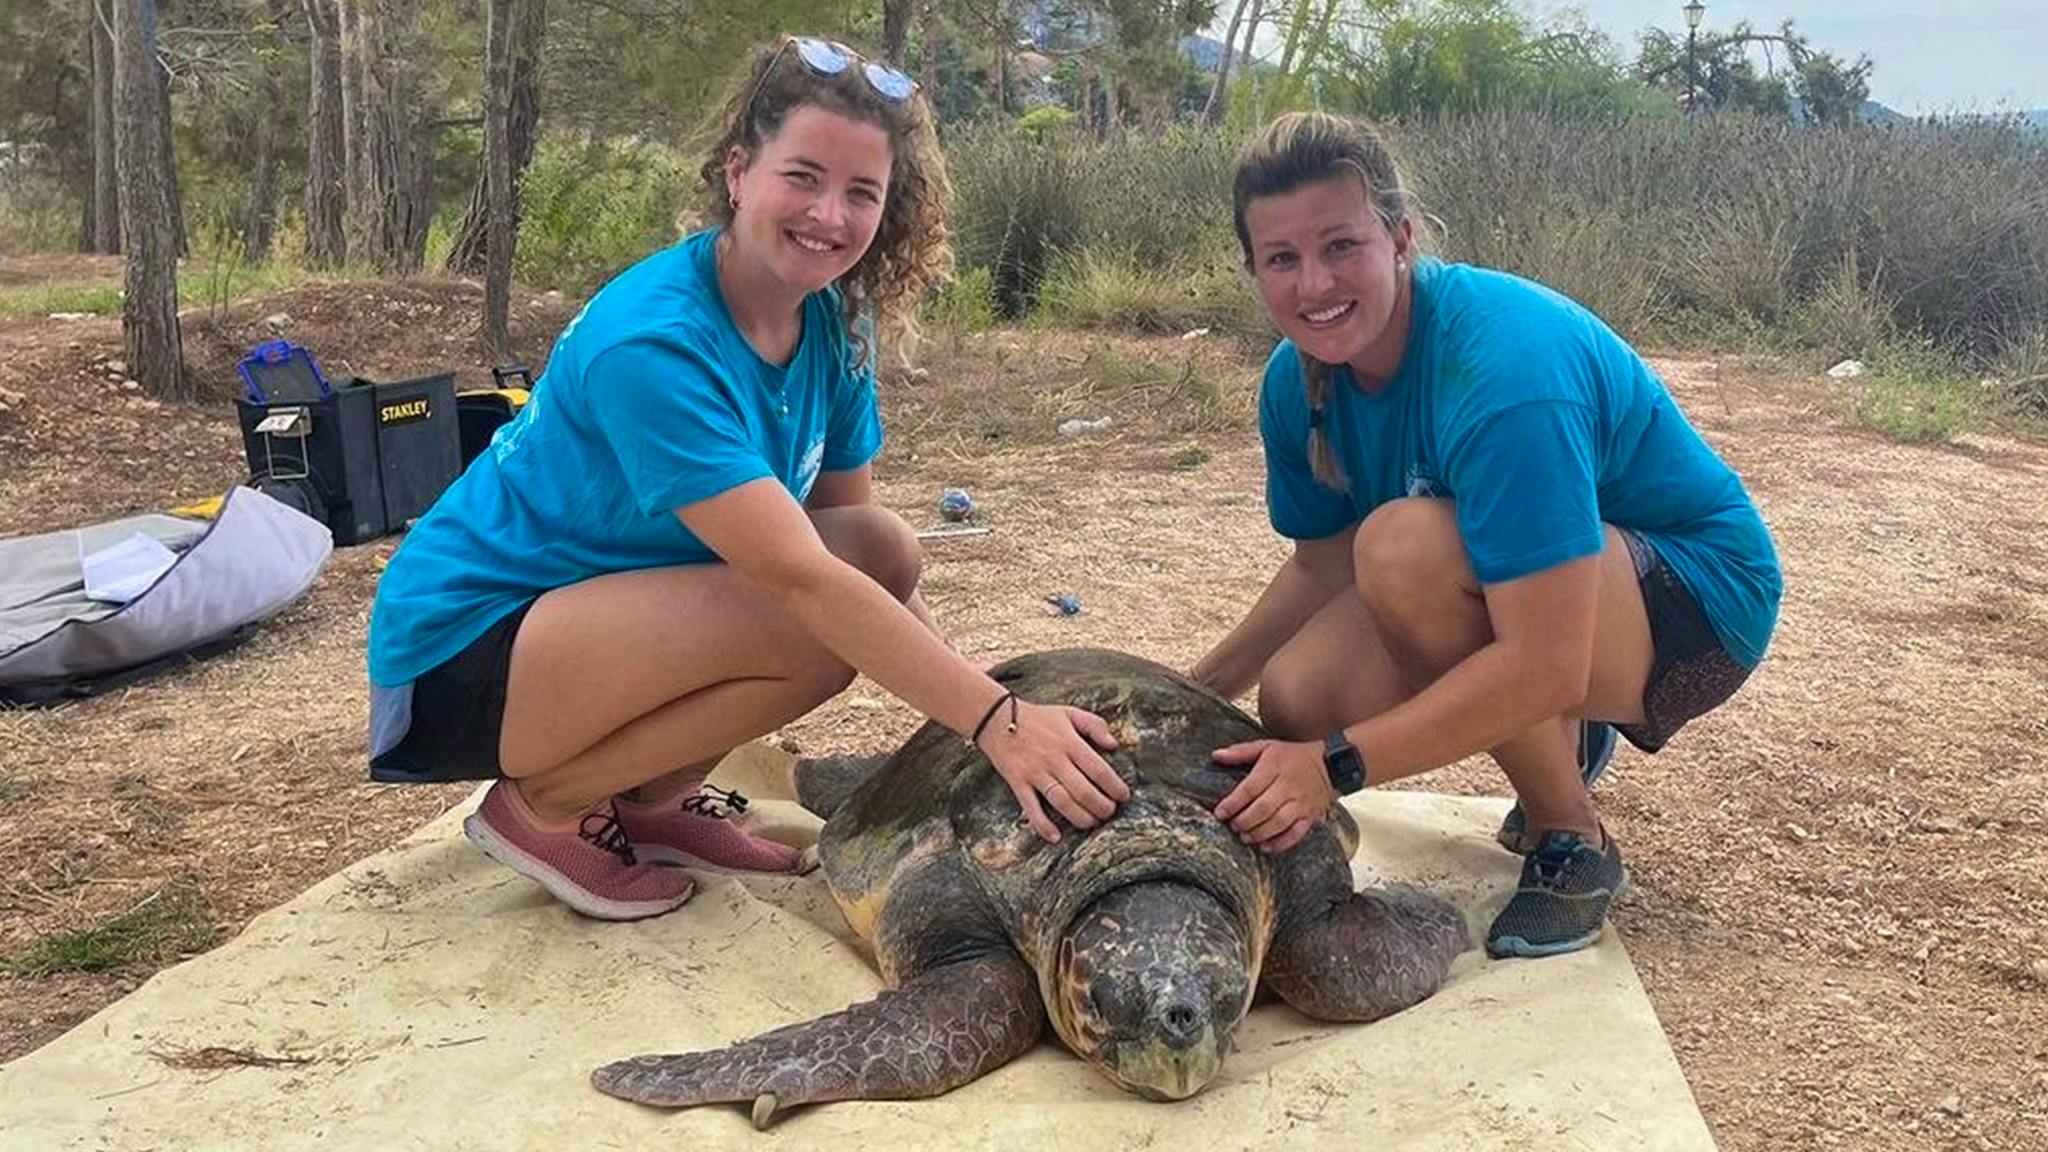 Two women in blue shirts taking a picture with a large sea turtle during a trip to Cabo Verde. Viagens low cost Cabo Verde for eco-friendly travel.